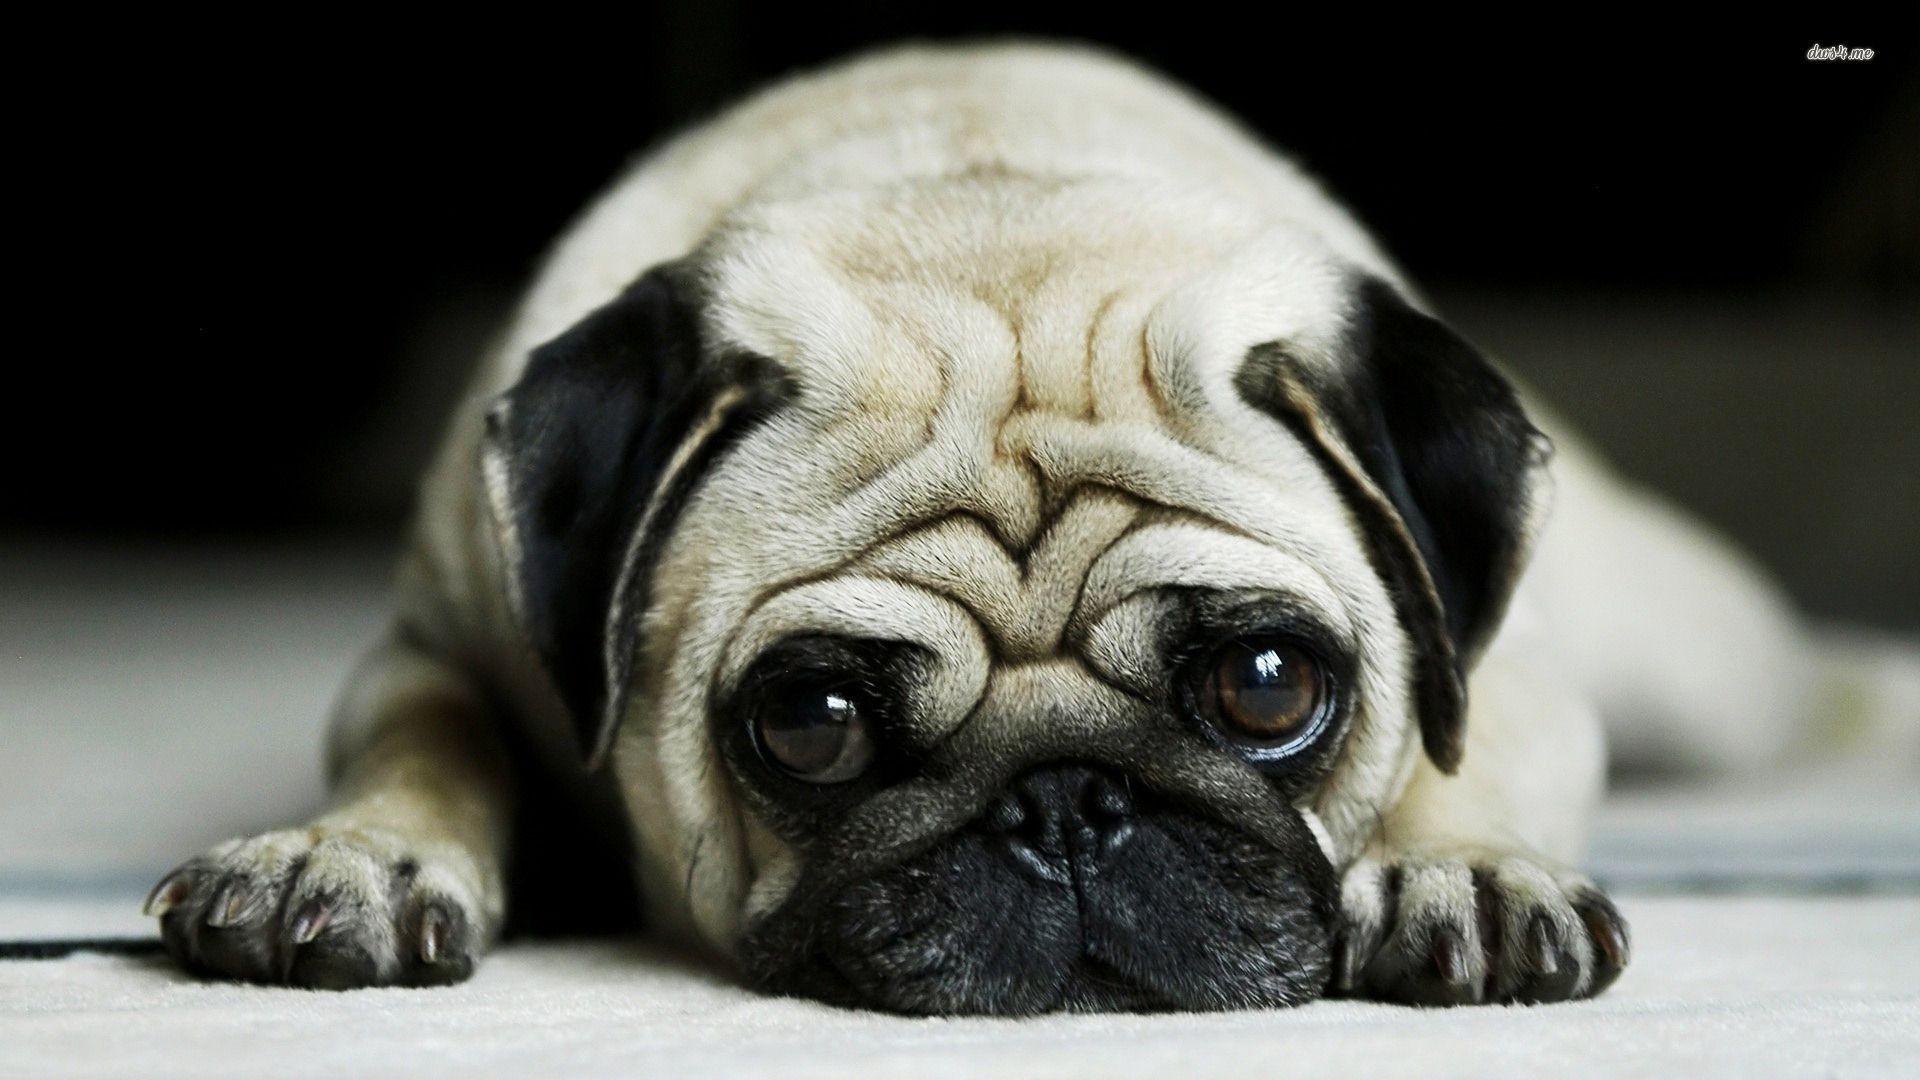 1920x1080  Pug Dog Wallpapers Android Apps on Google Play 1920Ã—1080 Pug Dog  Wallpapers (39